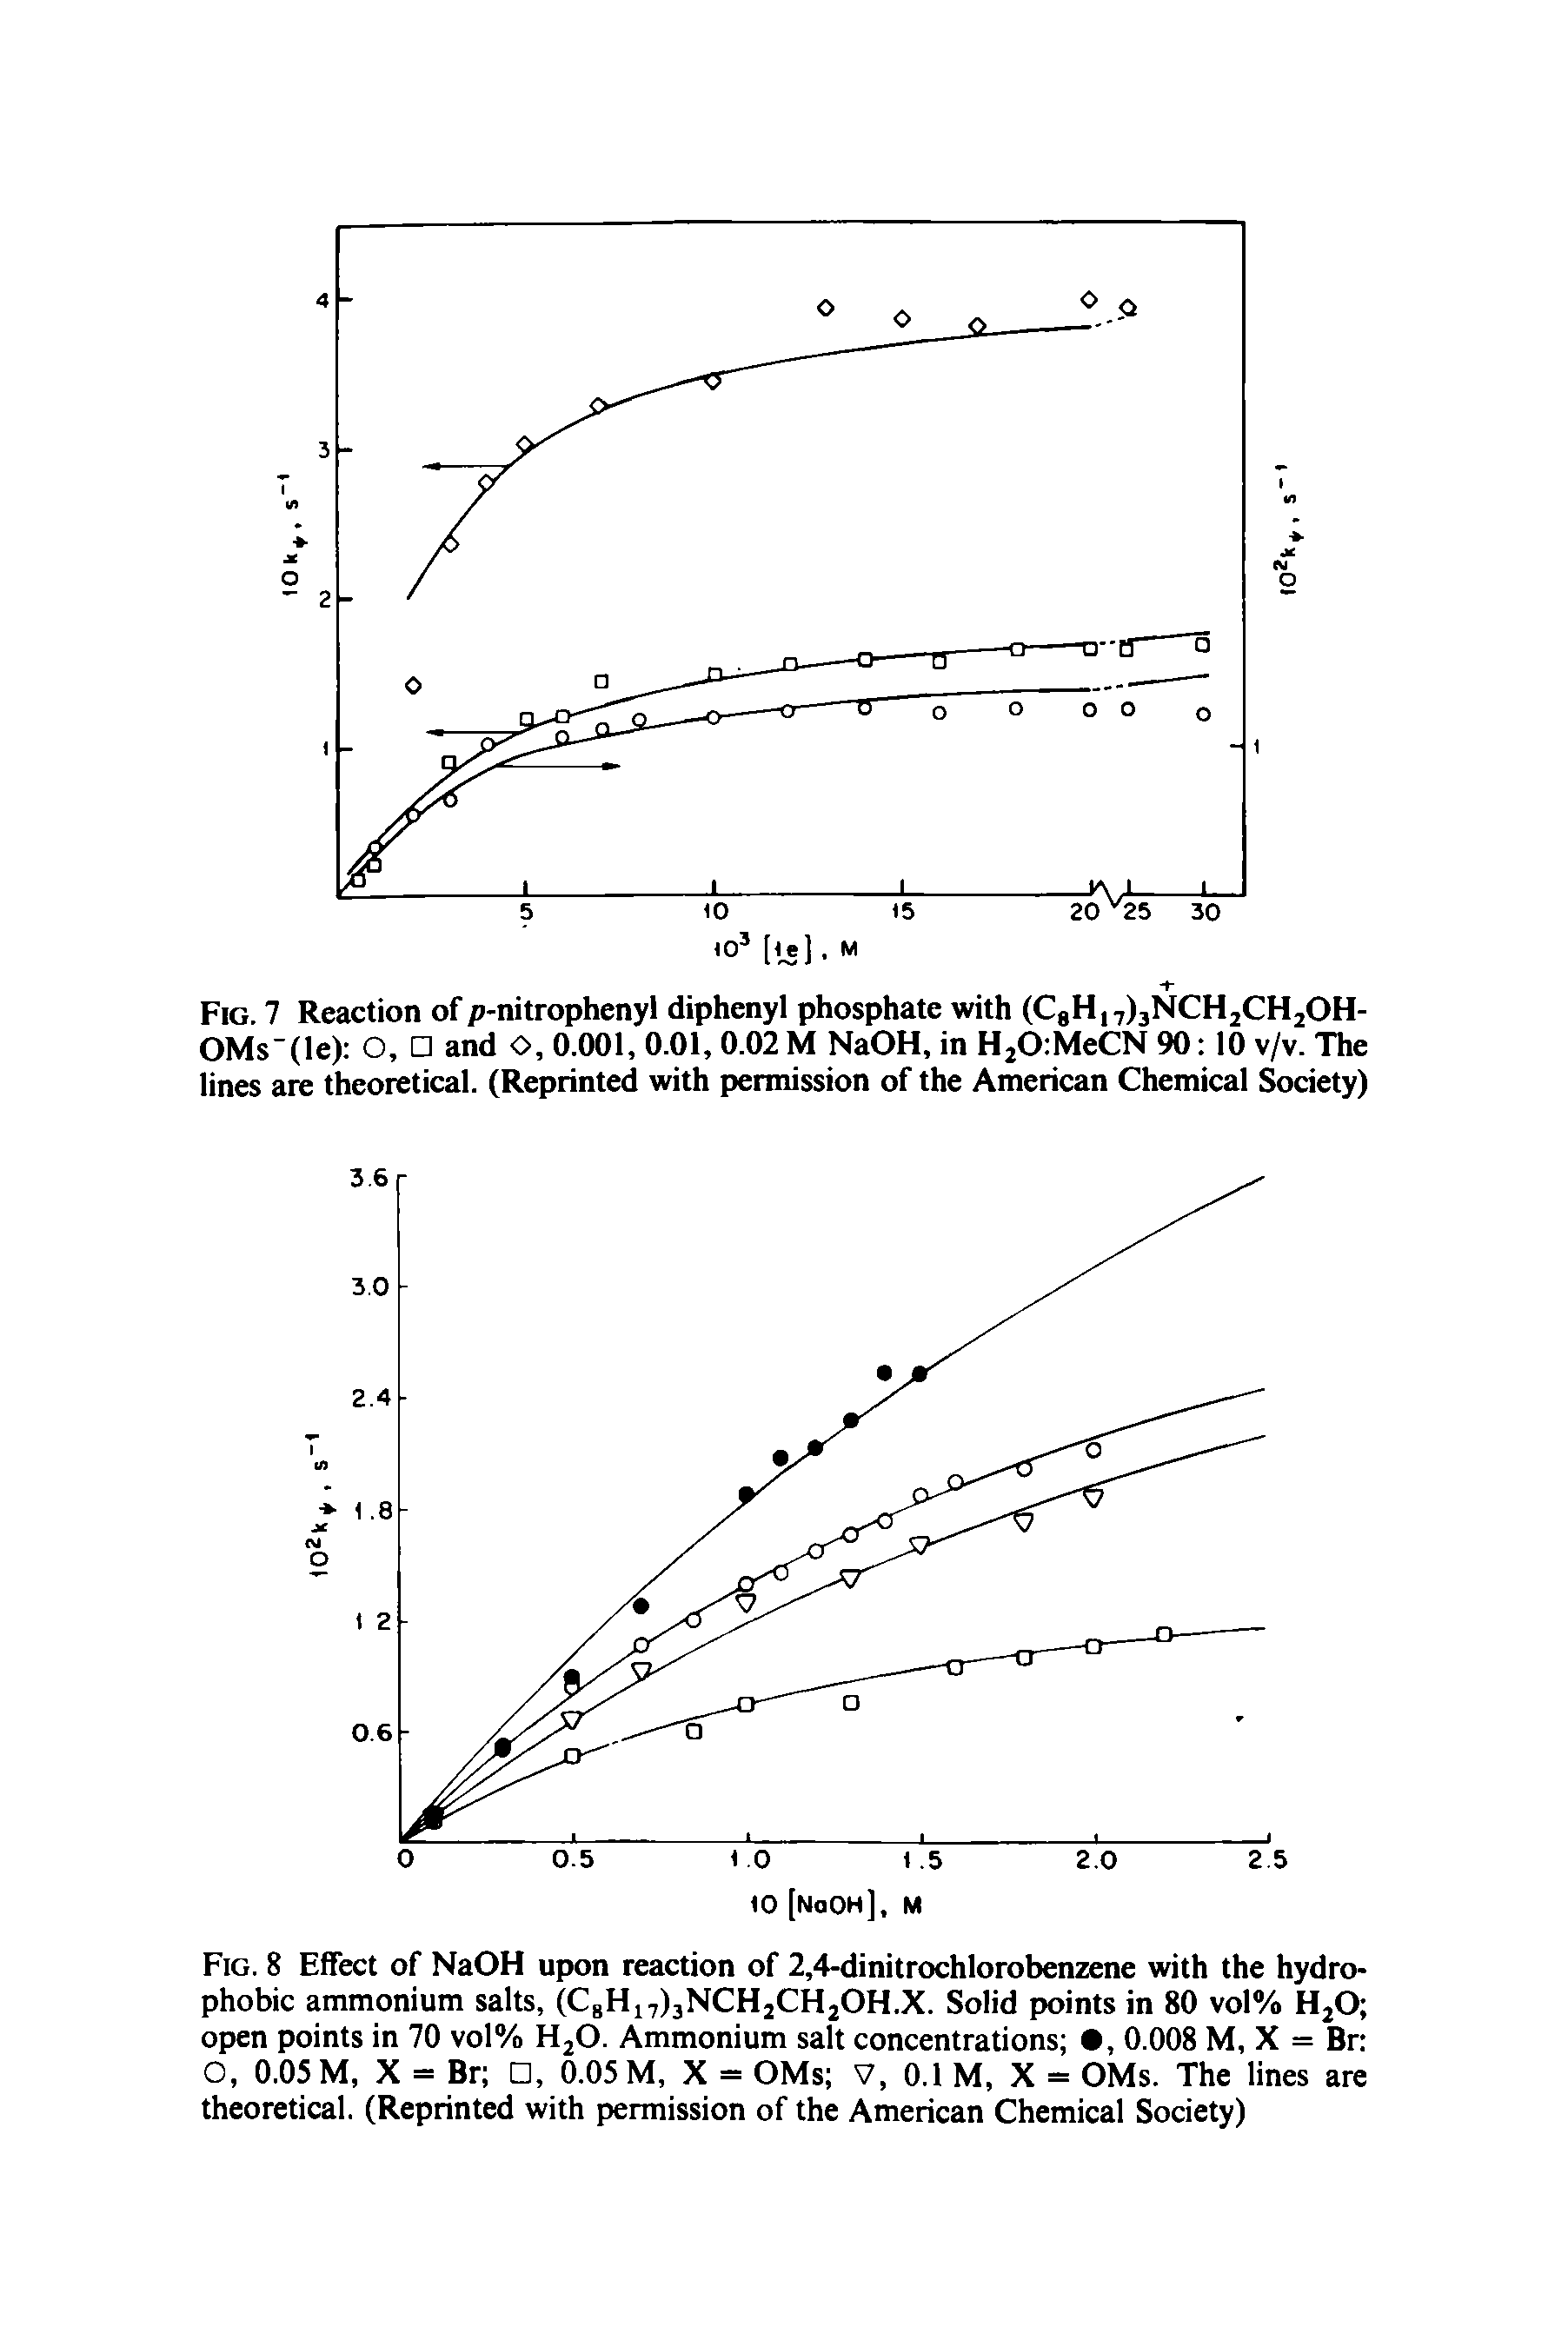 Fig. 8 Effect of NaOH upon reaction of 2,4-dinitrochlorobenzene with the hydro-phobic ammonium salts, (C H17)3NCH2CH2OH.X. Solid points in 80 vol% H2Oj open points in 70 vol% H20. Ammonium salt concentrations , 0.008 M, X = Br O, 0.05 M, X = Br , 0.05 M, X = OMs V, 0.1 M, X = OMs. The lines are theoretical. (Reprinted with permission of the American Chemical Society)...